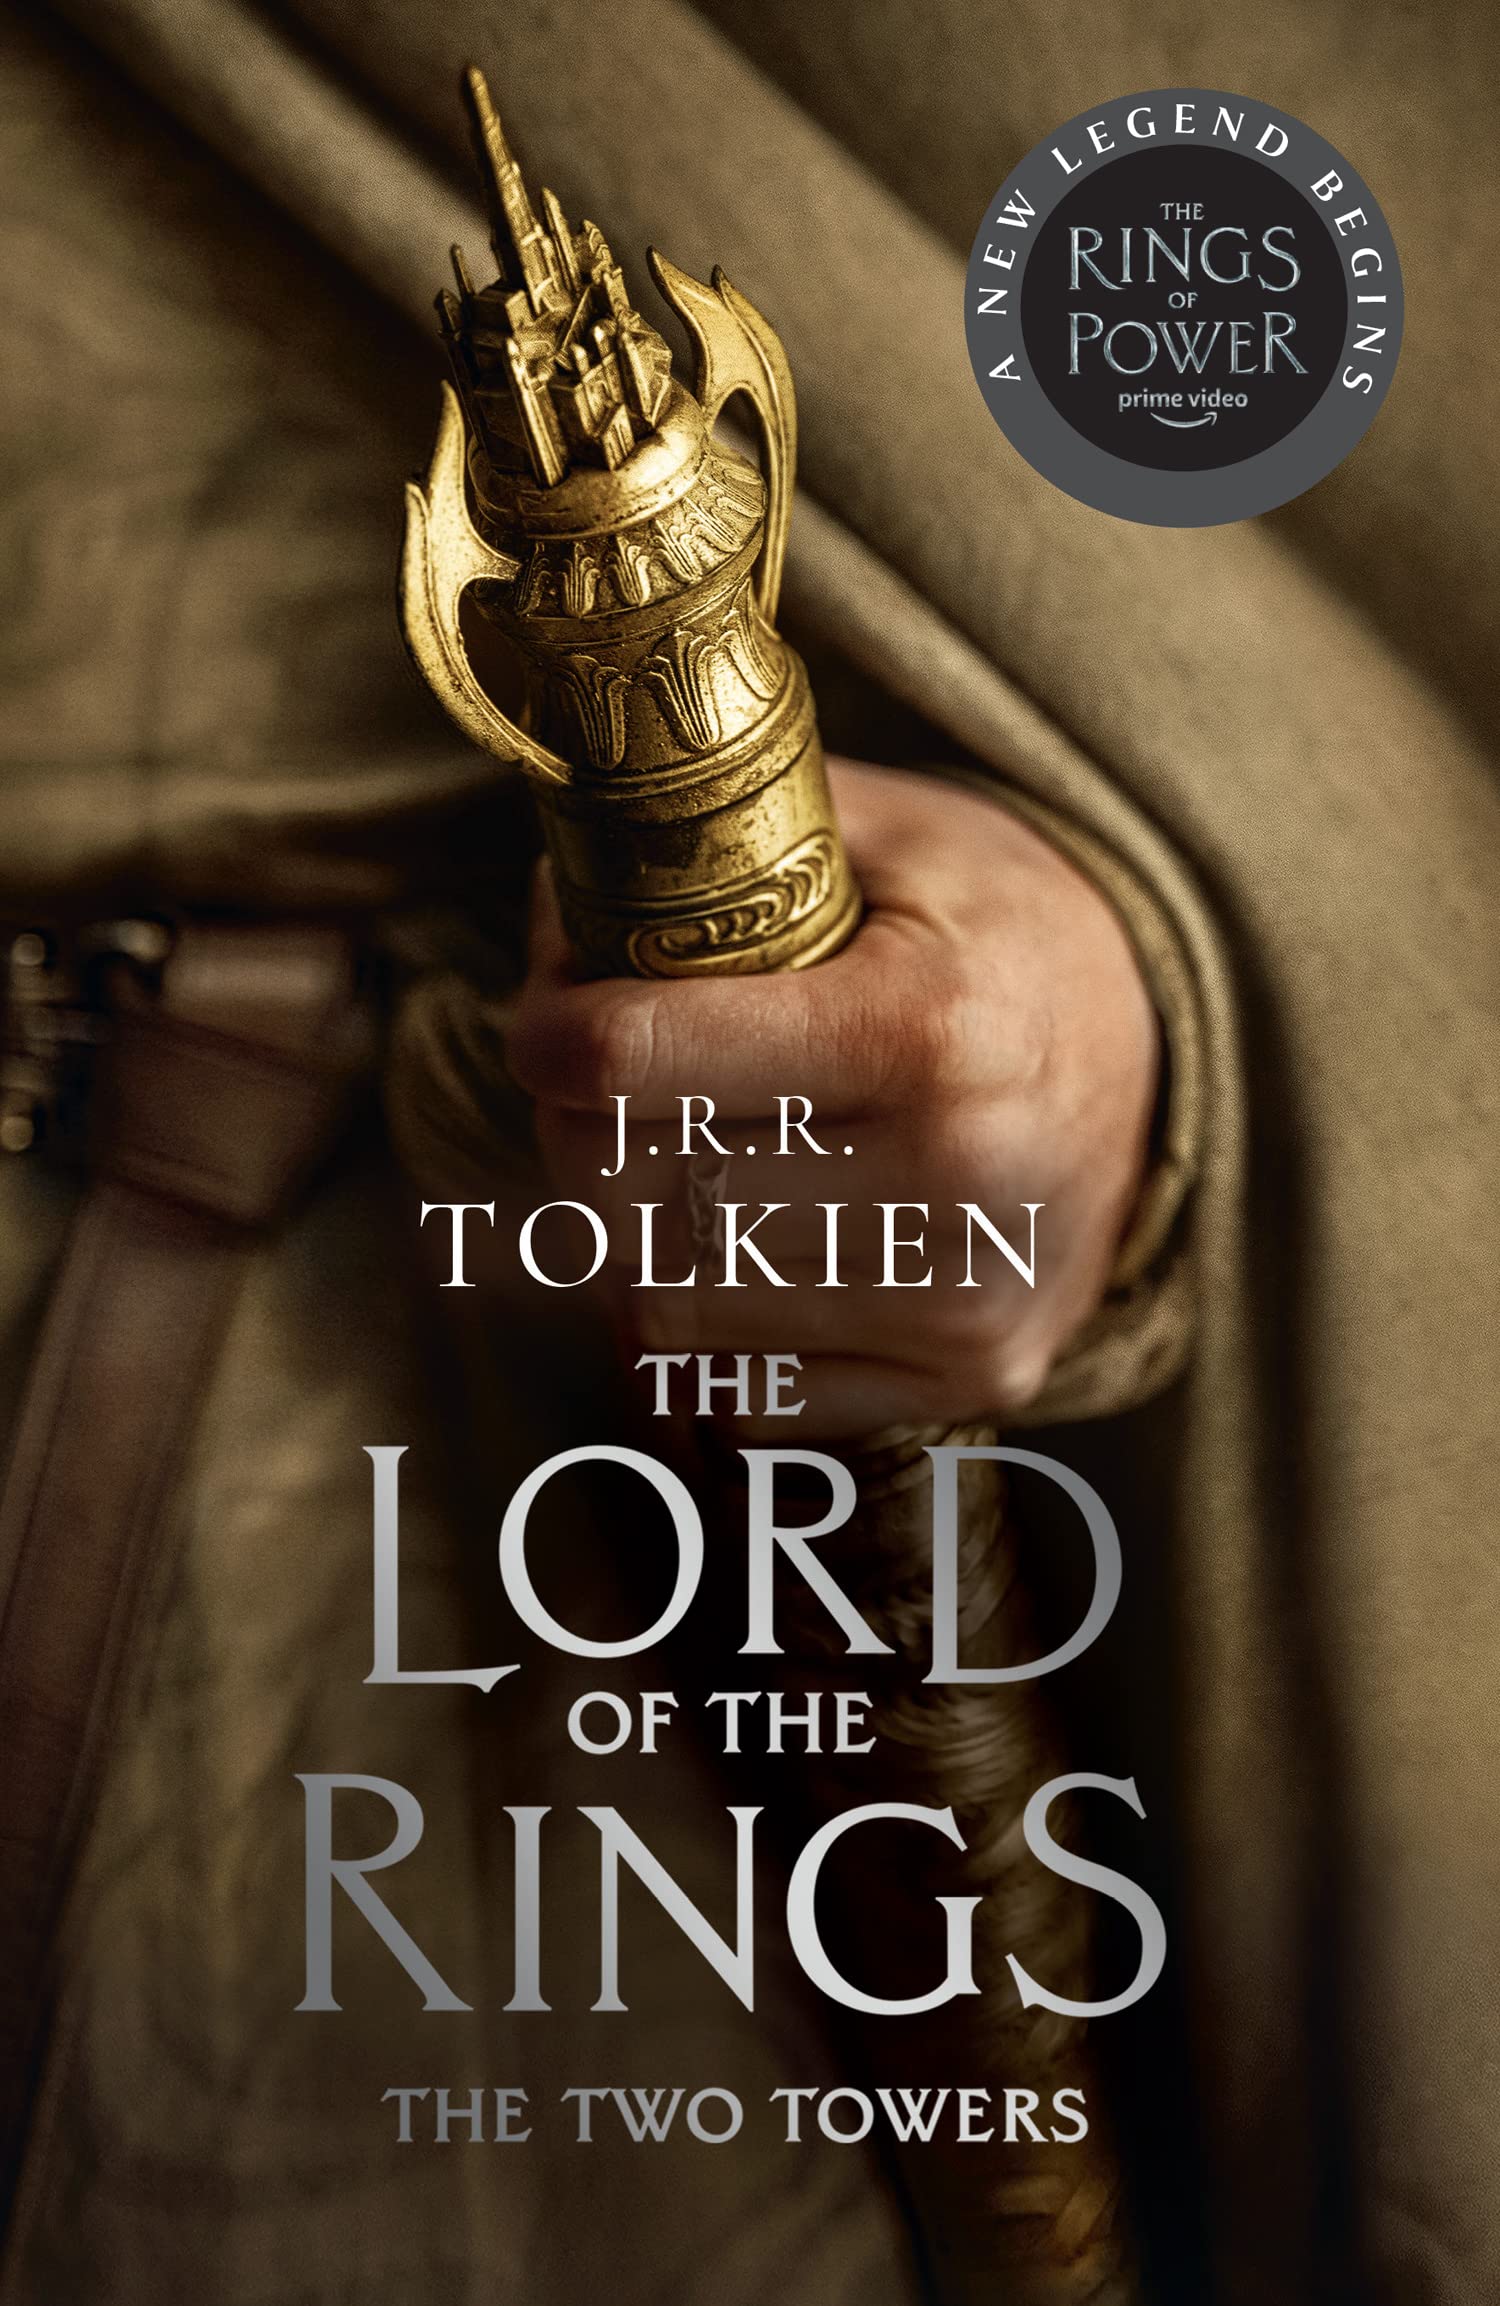 The Lord of the Rings Trilogy: J.R.R. Tolkien, Inglis, Rob: 9781402516276:  Amazon.com: Books